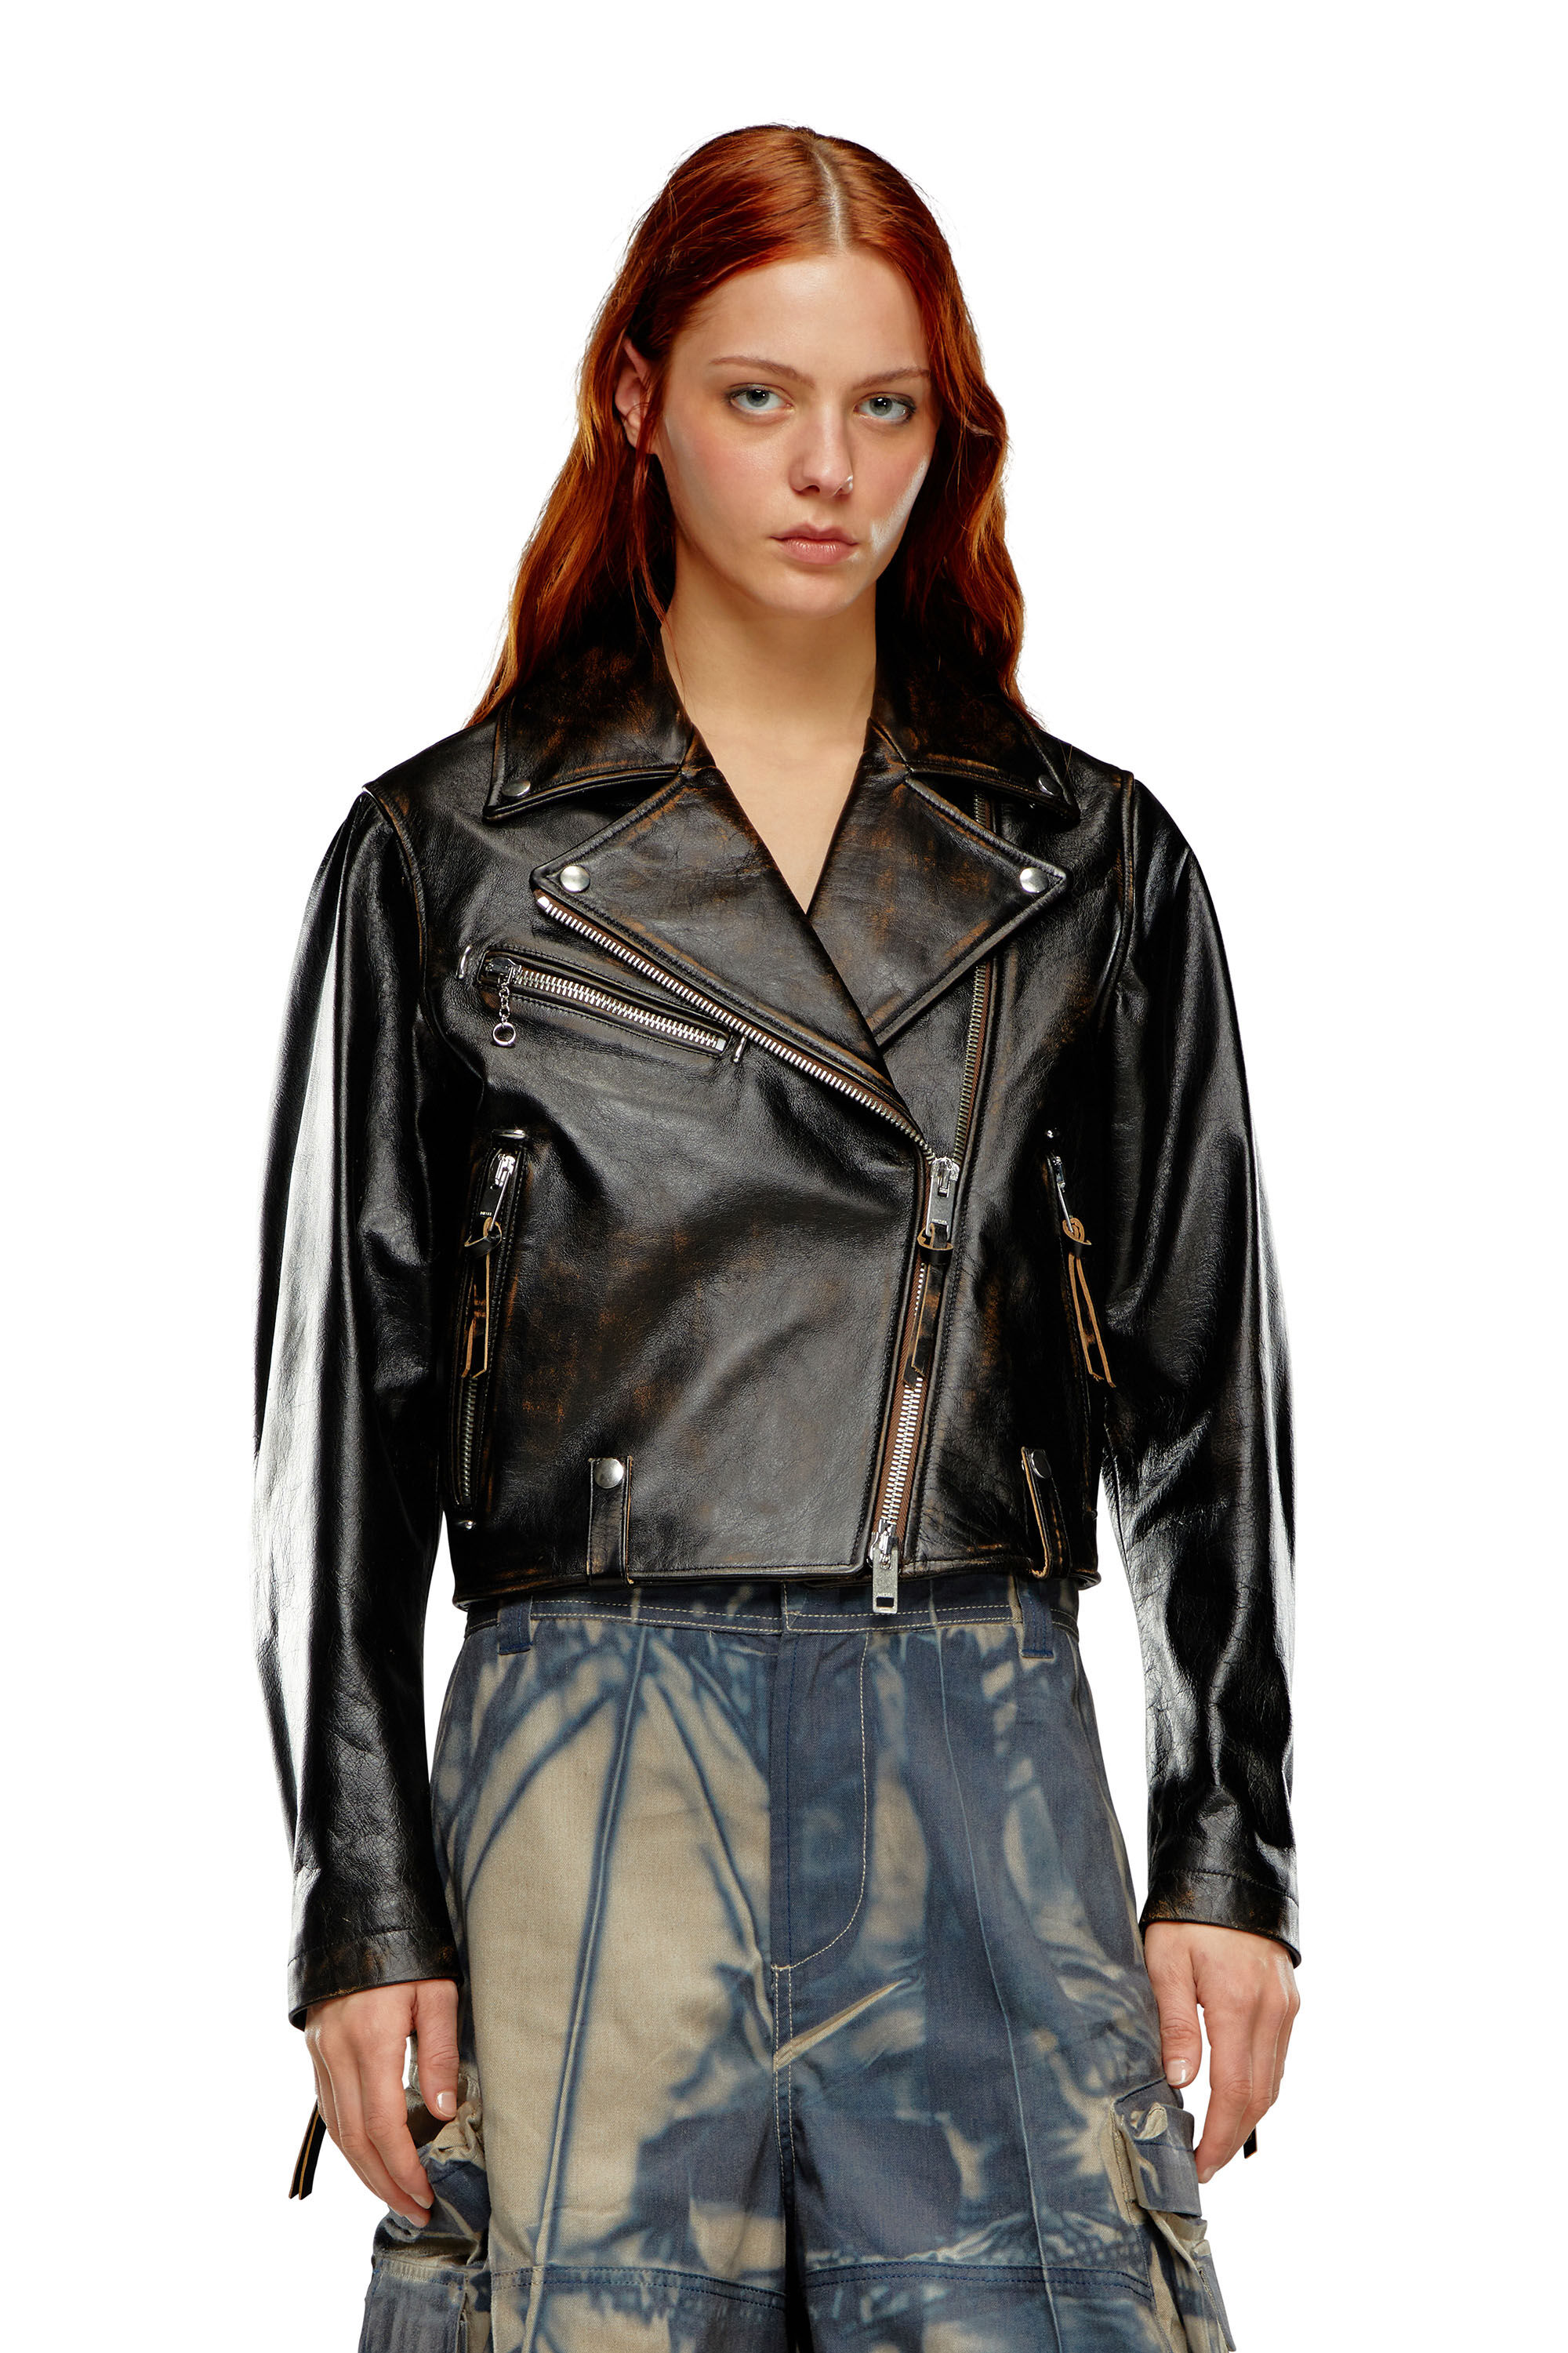 Women's distressed jacket in treated leather | Diesel L-EDMEA-CL